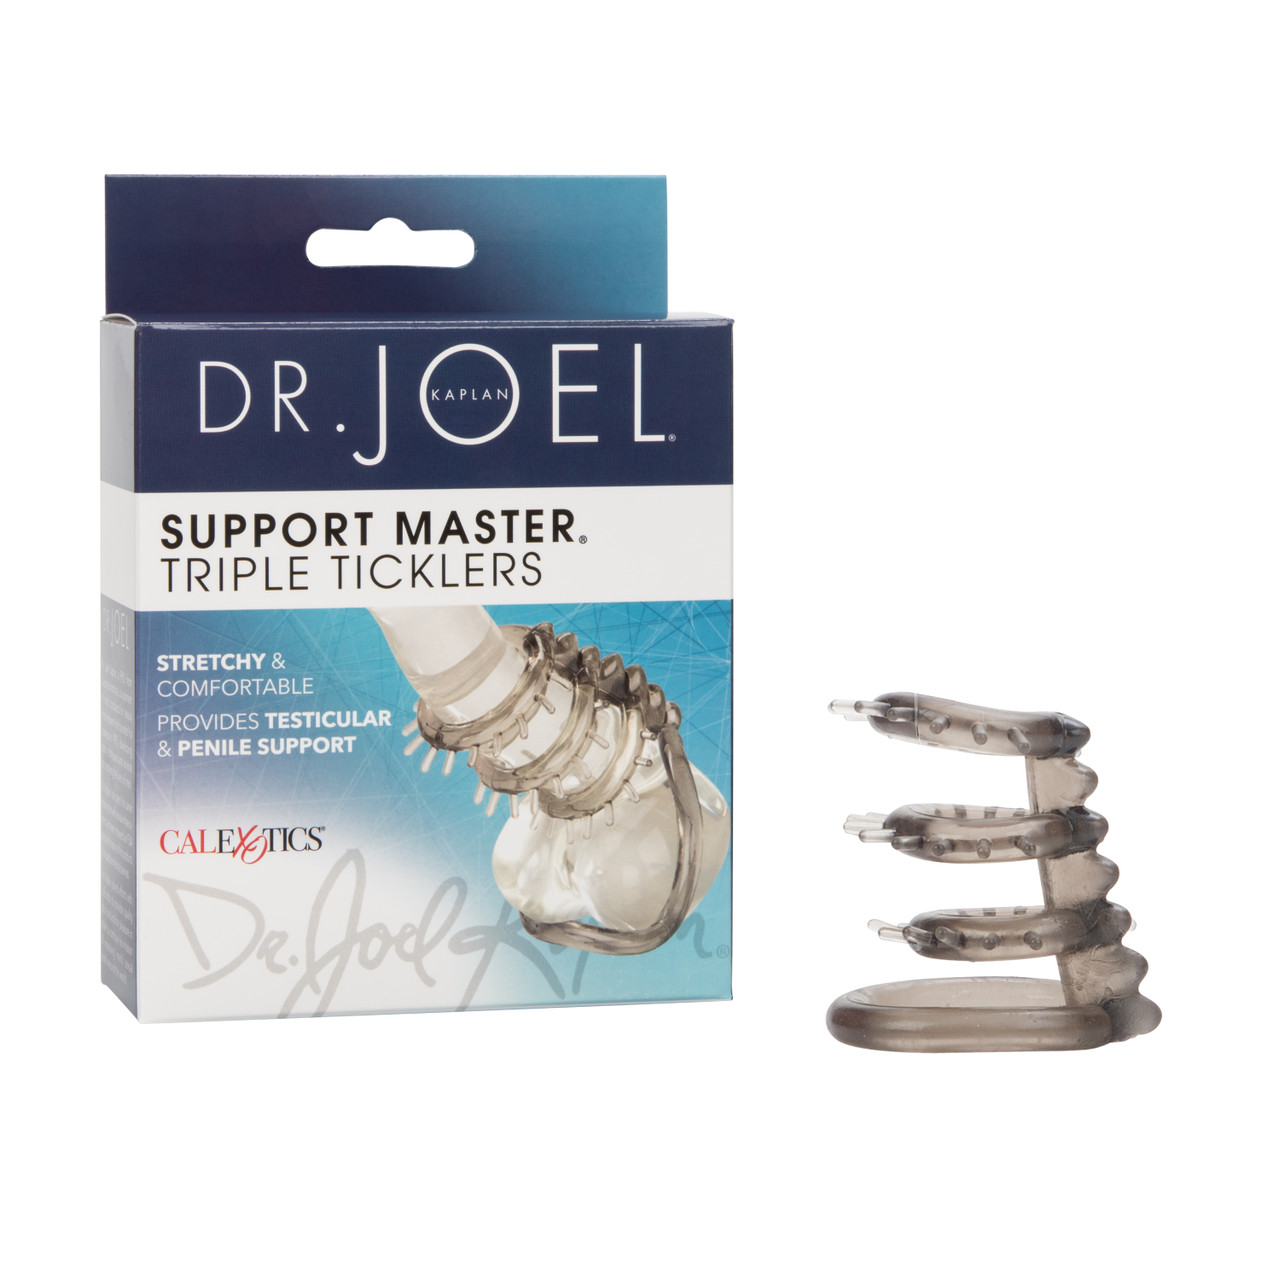 DR JOEL SUPPORT MASTER TRIPLE TICKLERS - Click Image to Close